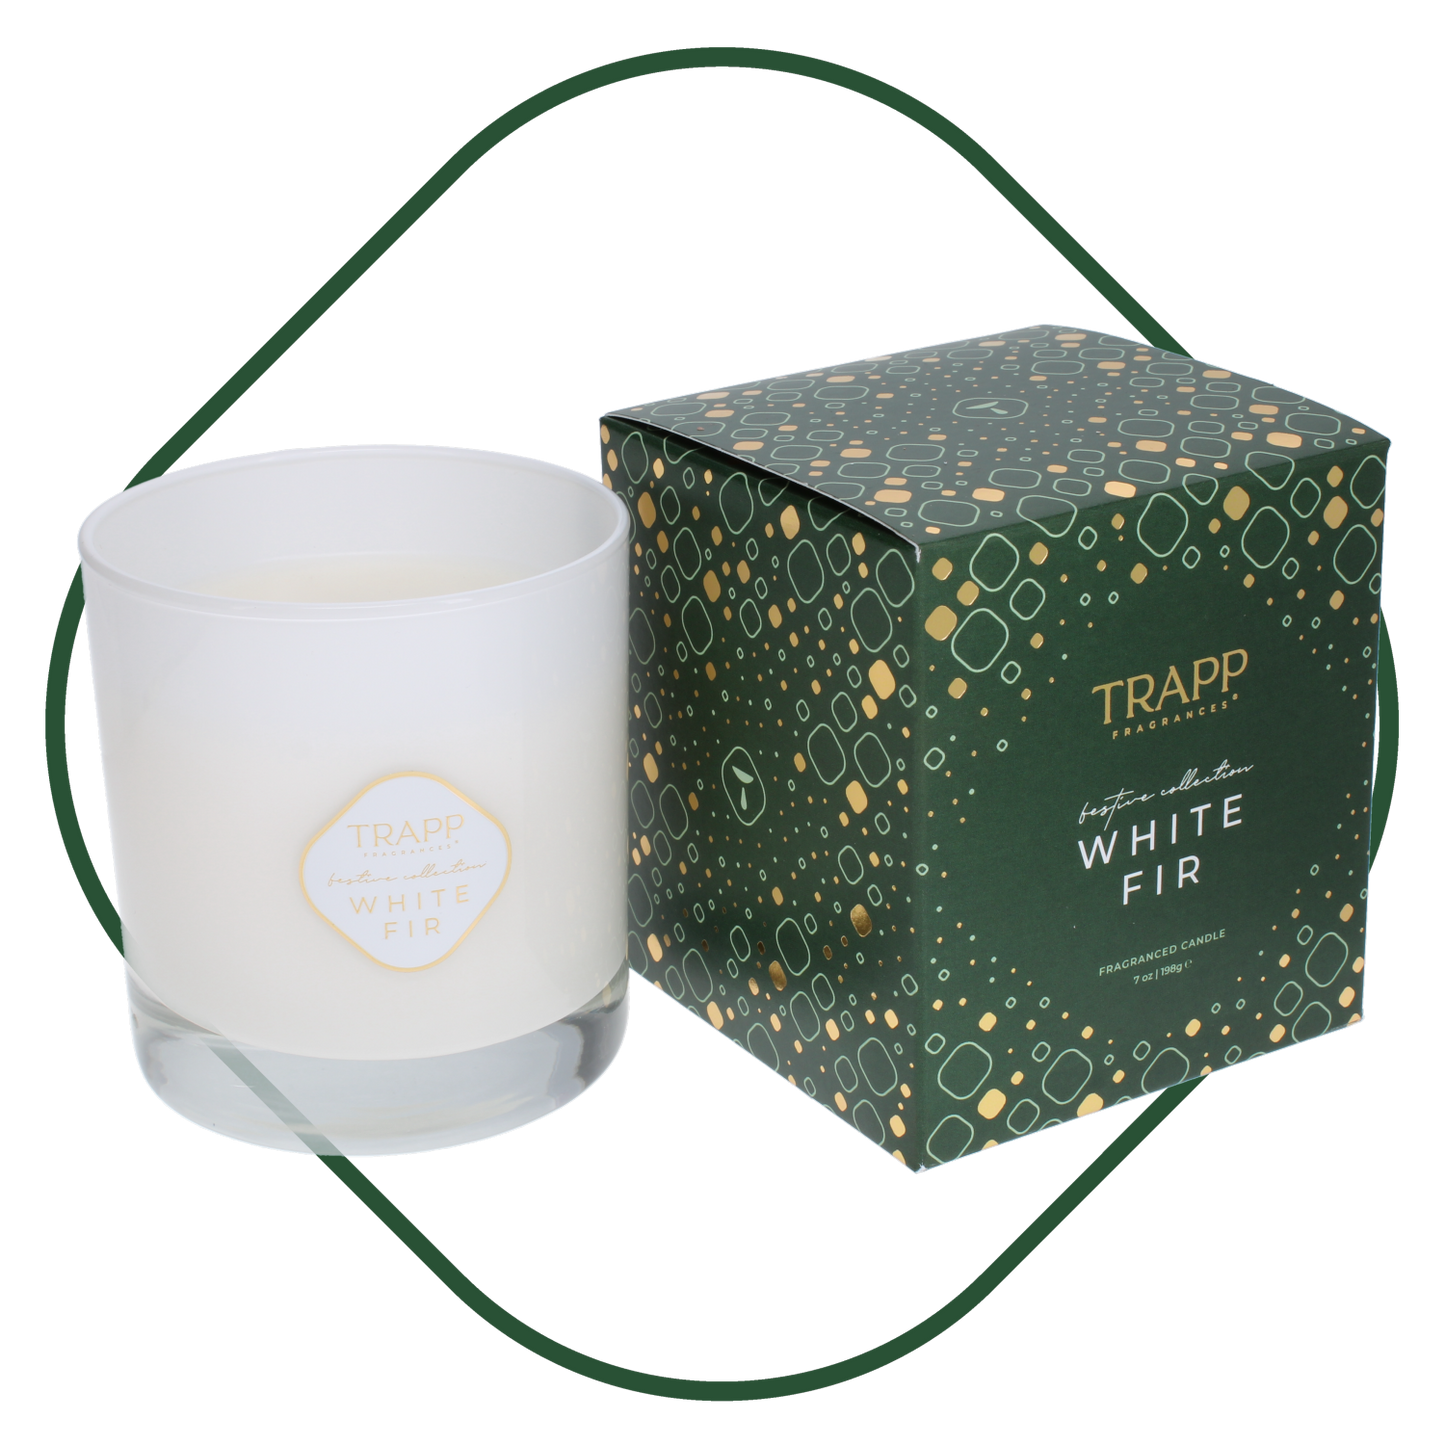 Seasonal Candle White Fir 7 oz. Candle in Signature Box